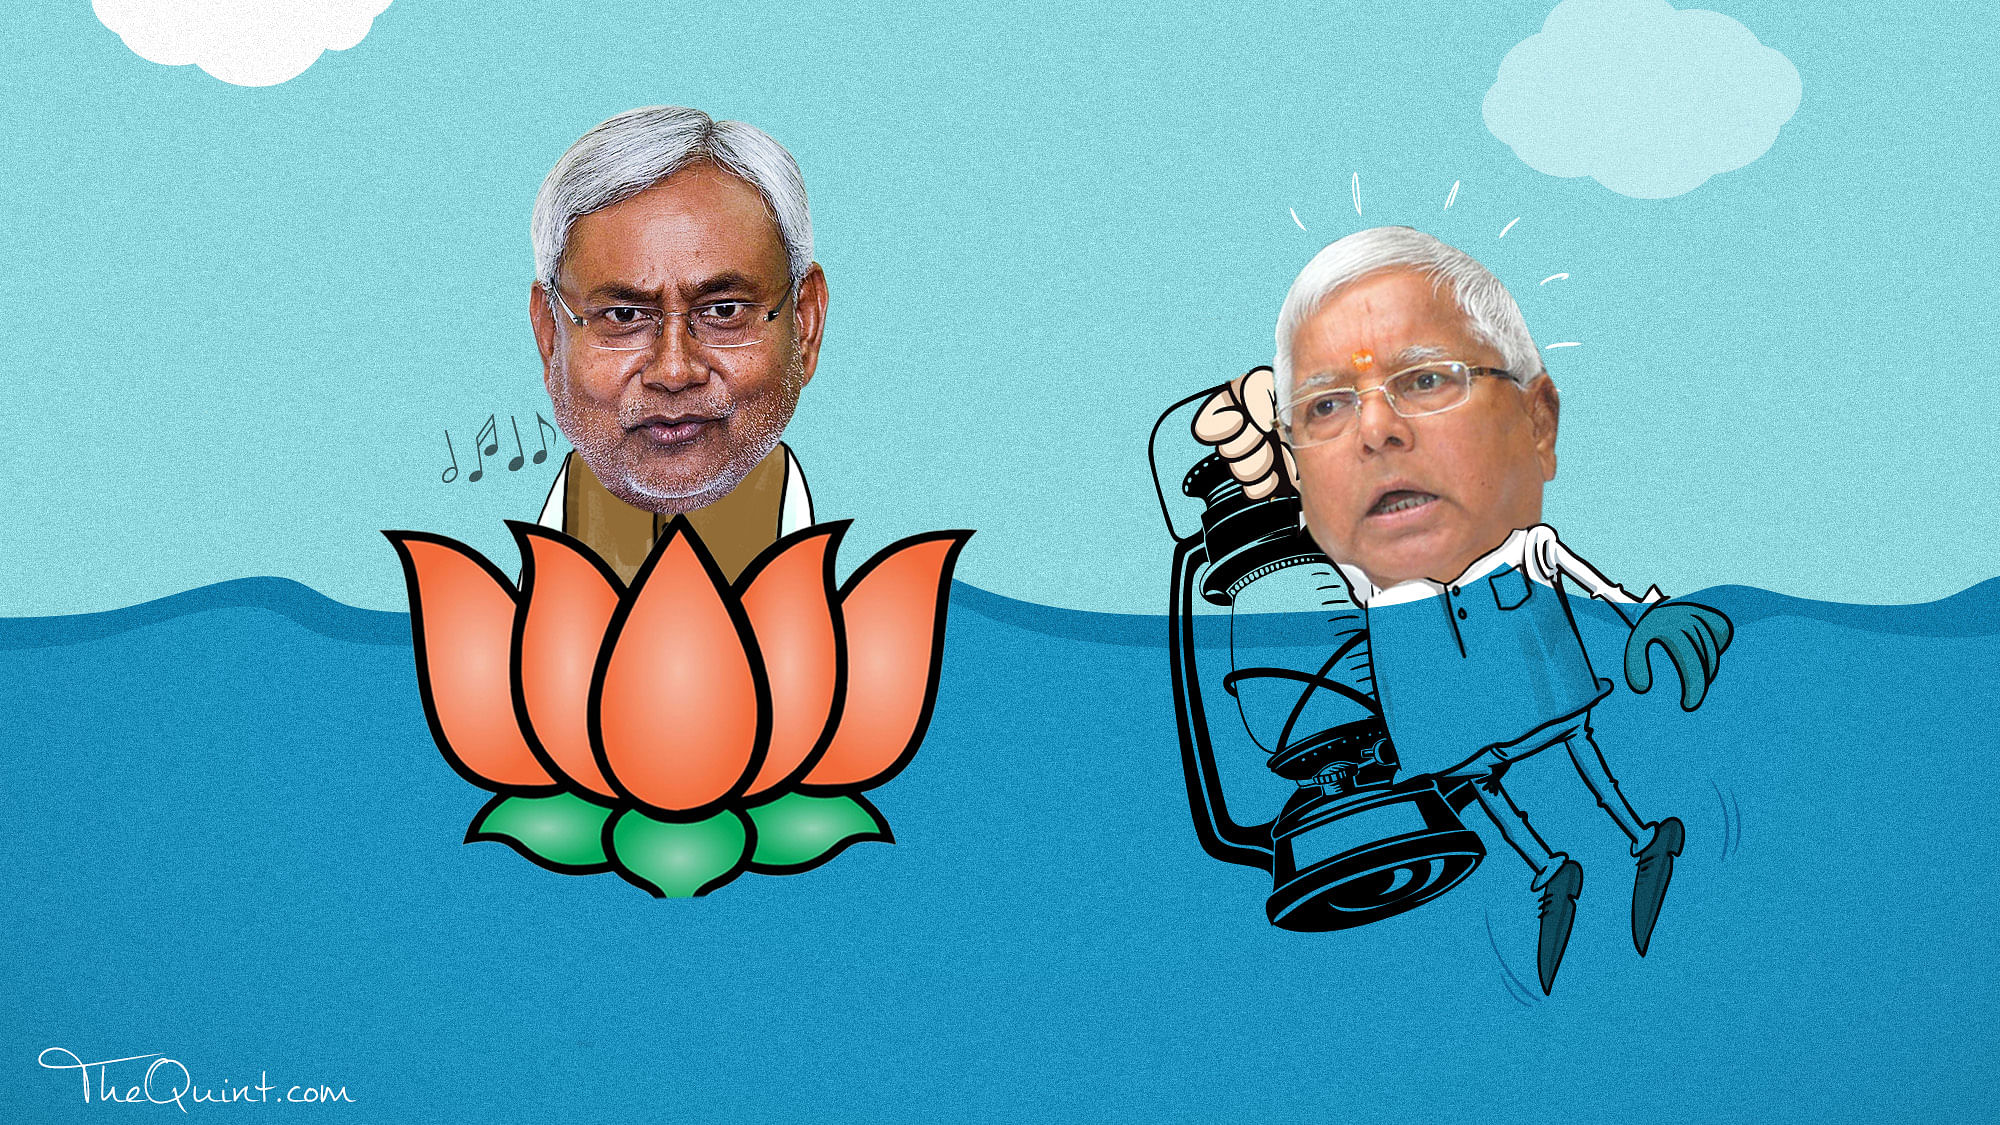 

Nitish has secured his political future by joining the BJP’s bandwagon, as he has realised the strength of Modi wave.